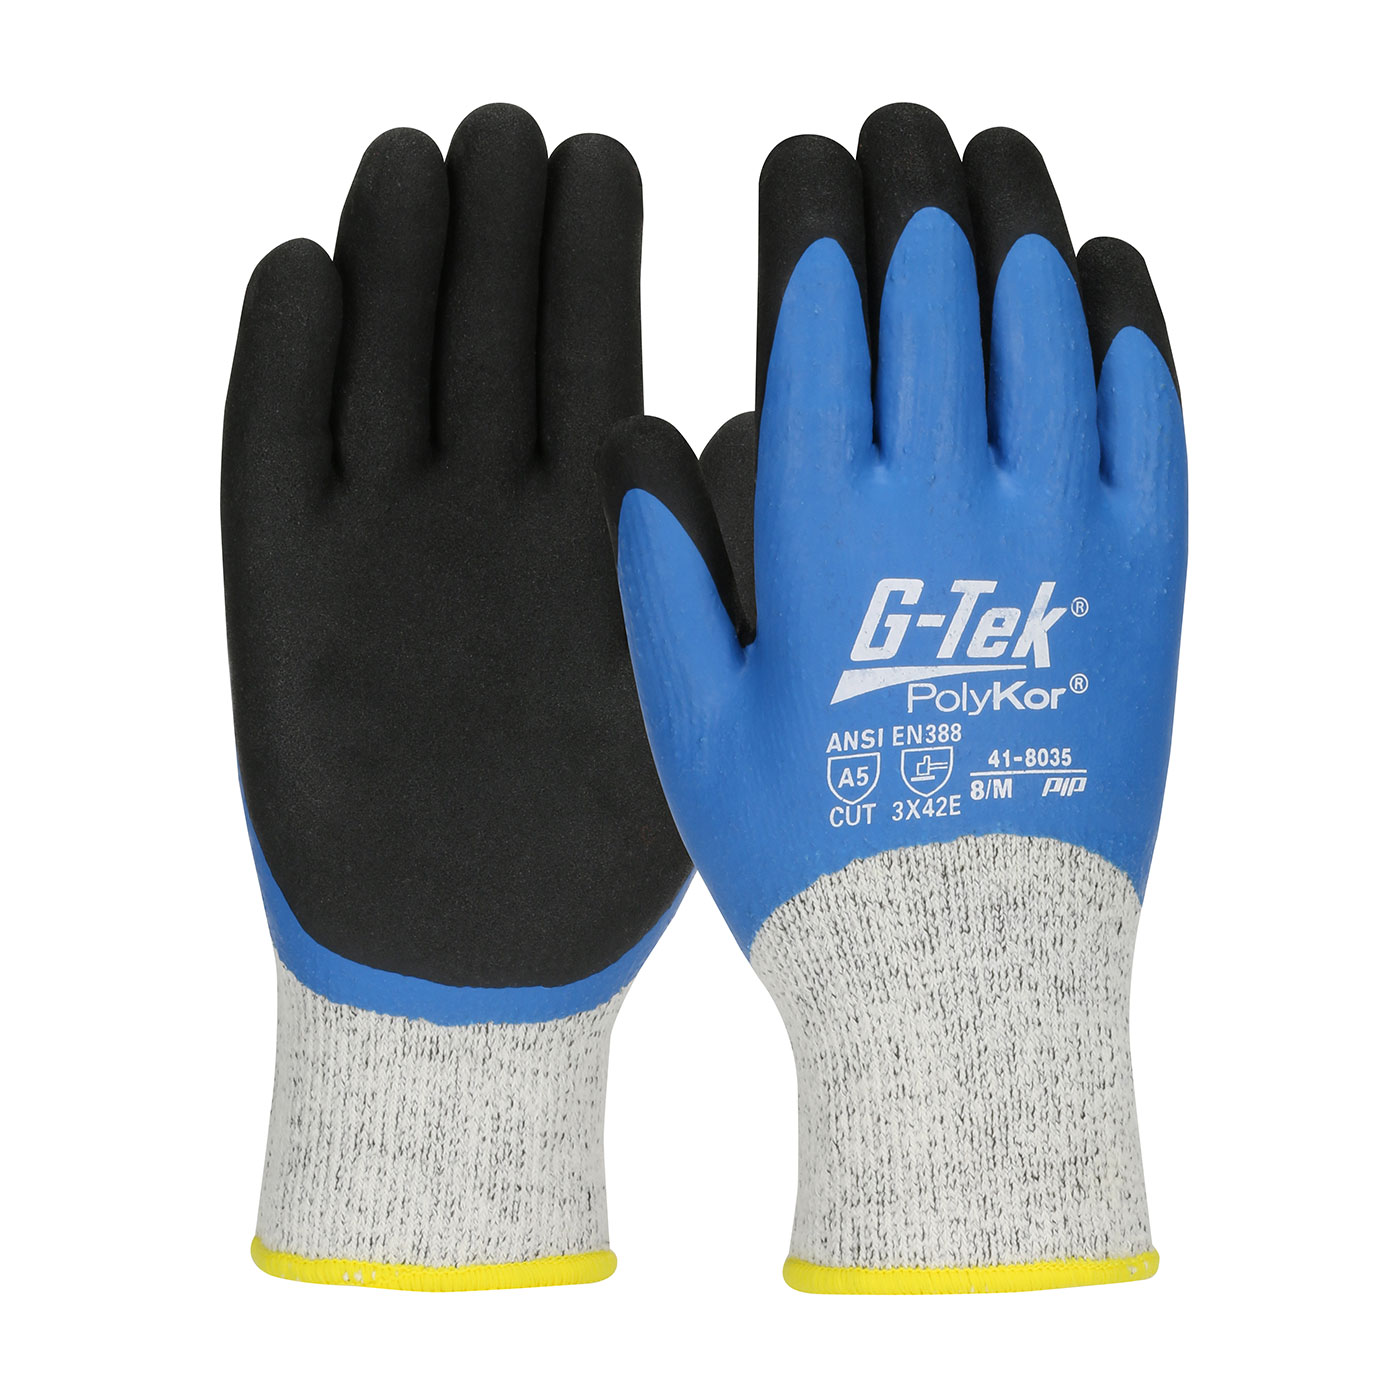 #41-8035 PIP® G-Tek® Seamless Knit PolyKor® Glove with Acrylic Liner and Double Dipped Latex  Coated MicroSurface Grip on Full Hand